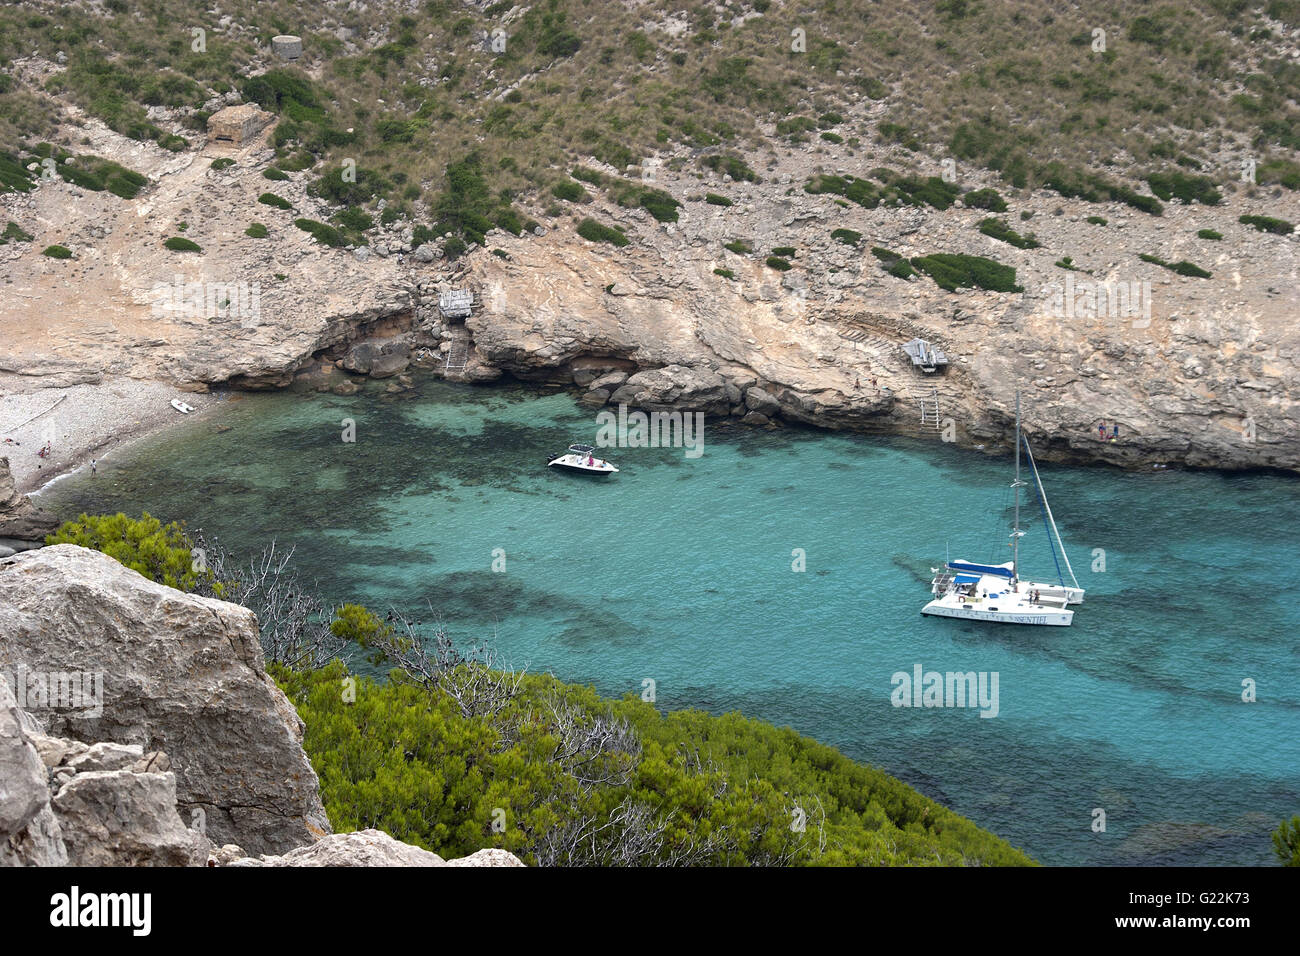 a beautiful inlet with crystal clear water and boats, Palma de Mallorca, Spain, seaside, tourism, holidays, summer, nature Stock Photo